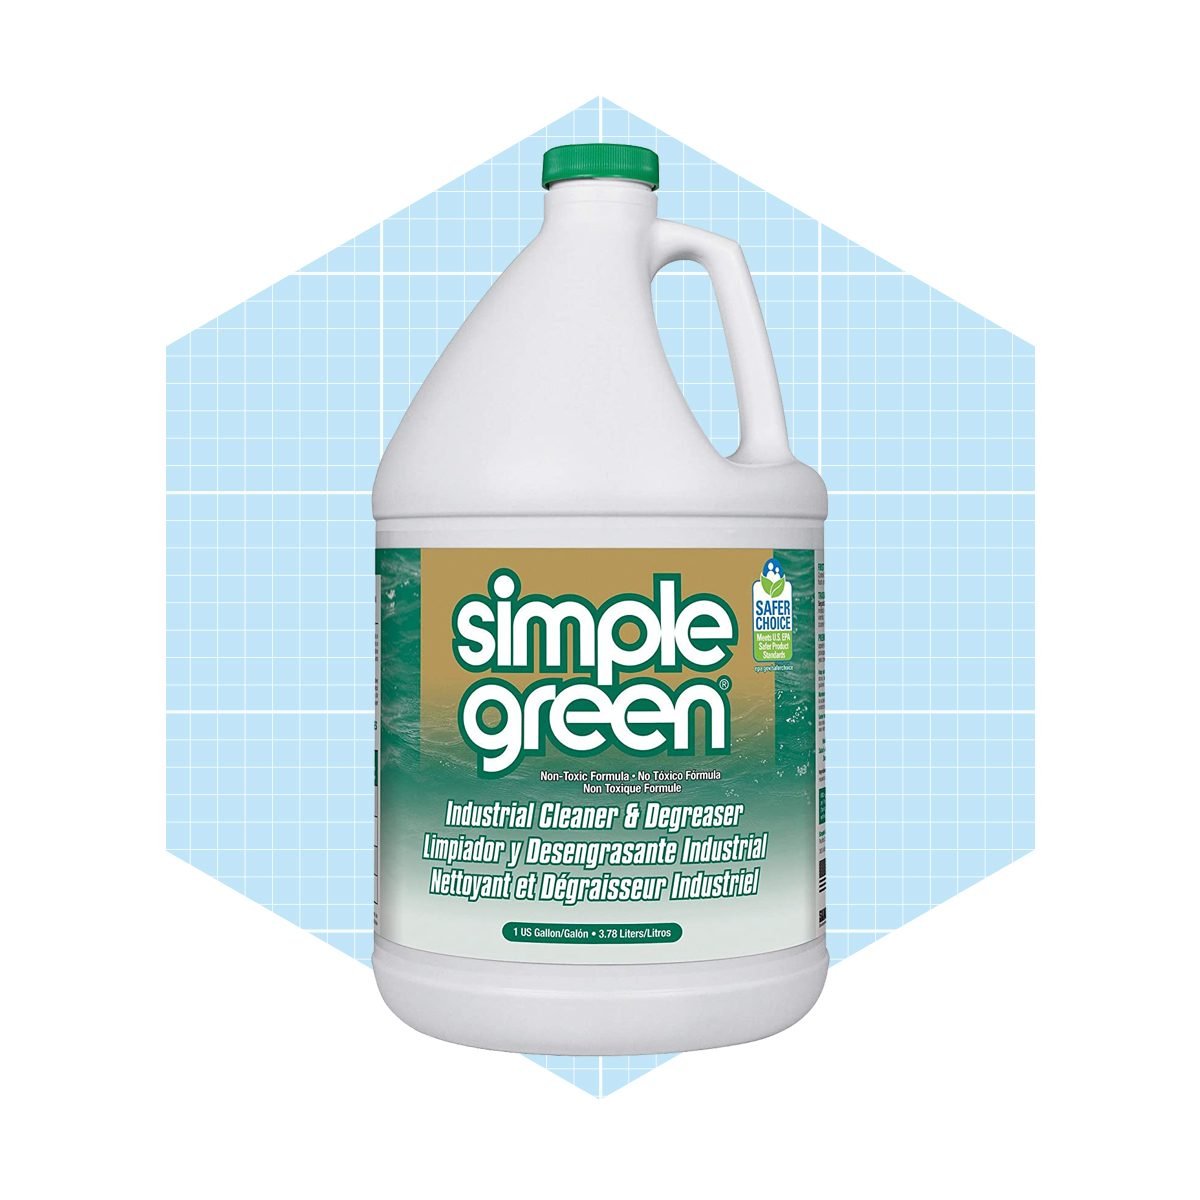 Simple Green Industrial Cleaner And Degreaser, Concentrated Ecomm Amazon.com